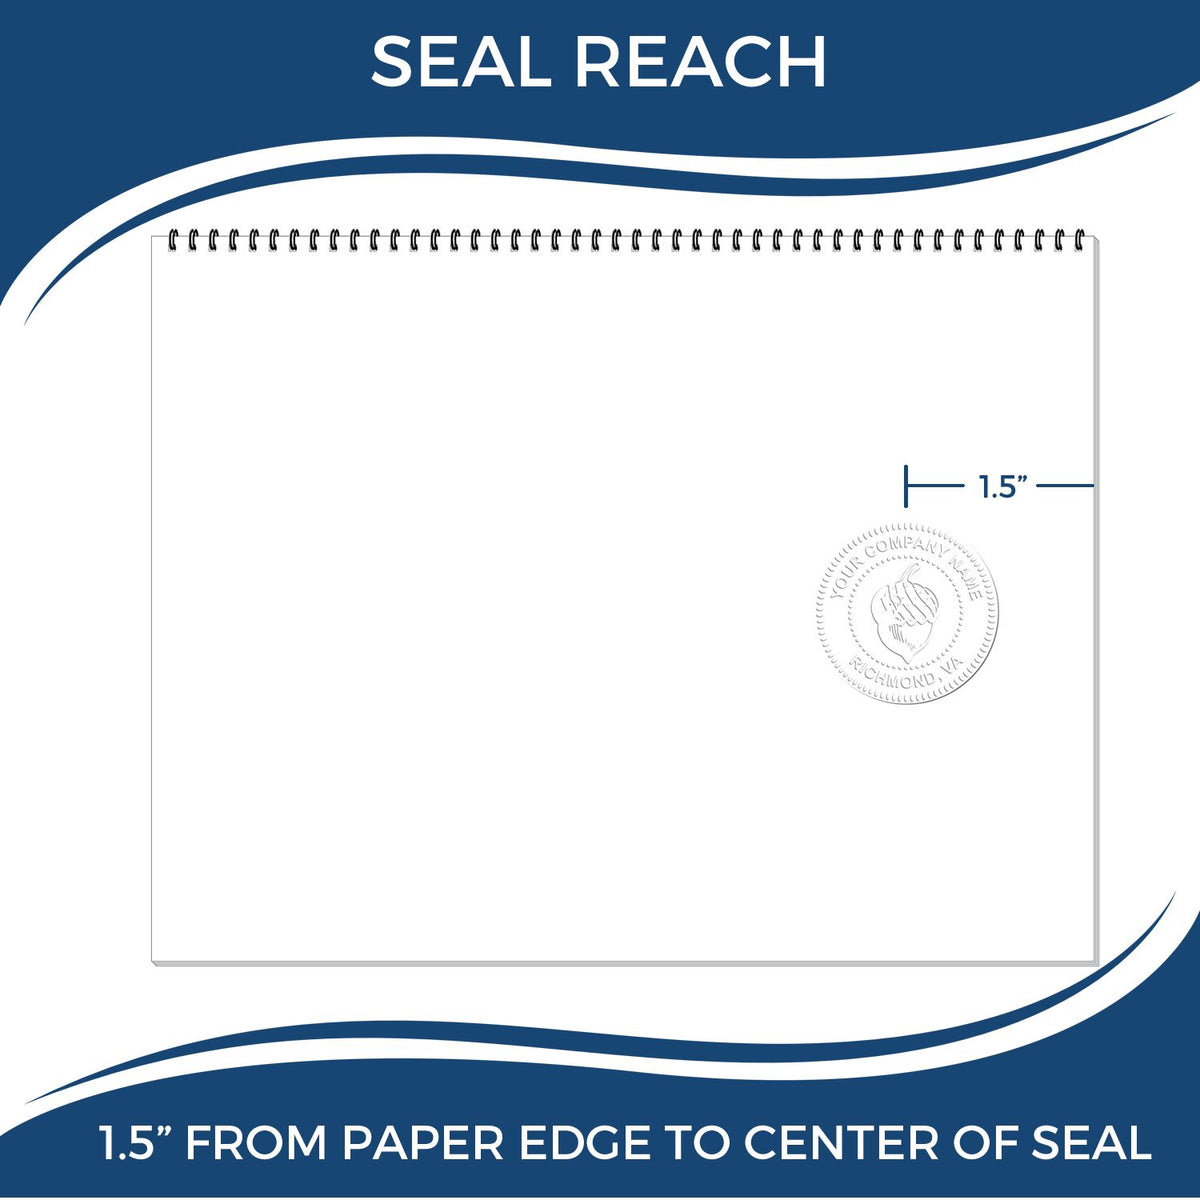 An infographic showing the seal reach which is represented by a ruler and a miniature seal image of the Gift Arizona Geologist Seal